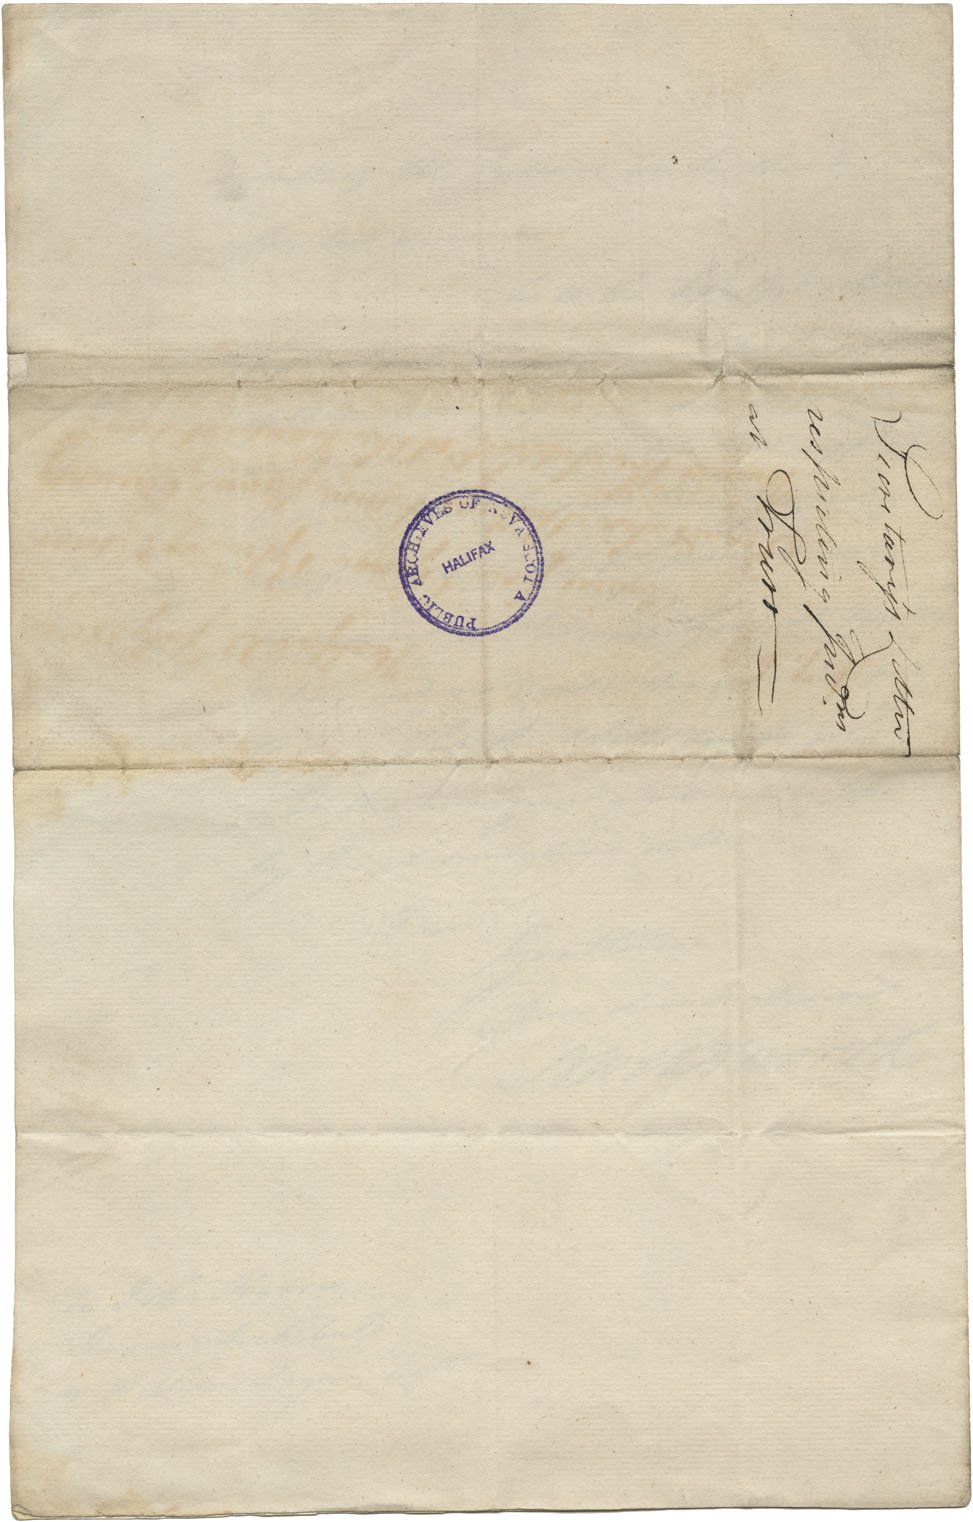 Letter of Sir John Wentworth informing John Harris, James Archibald and William Logan of the appointment of Col. Pearson and steps taken to relieve the Mi'kmaq. 